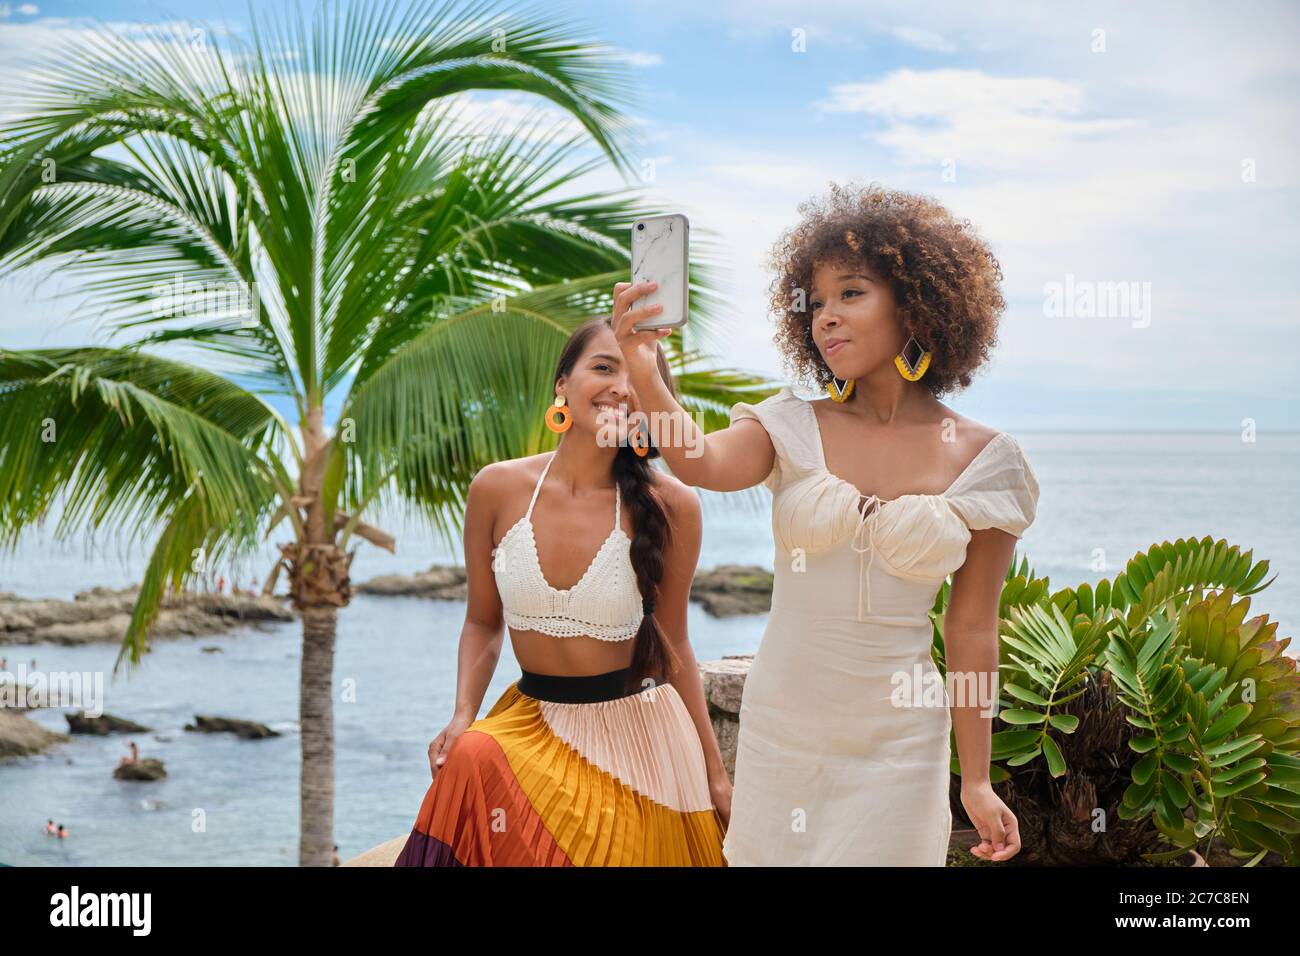 2 young women take a selfie in front of palm tree and ocean in Puerto Vallarta, Jalisco, Mexico Stock Photo